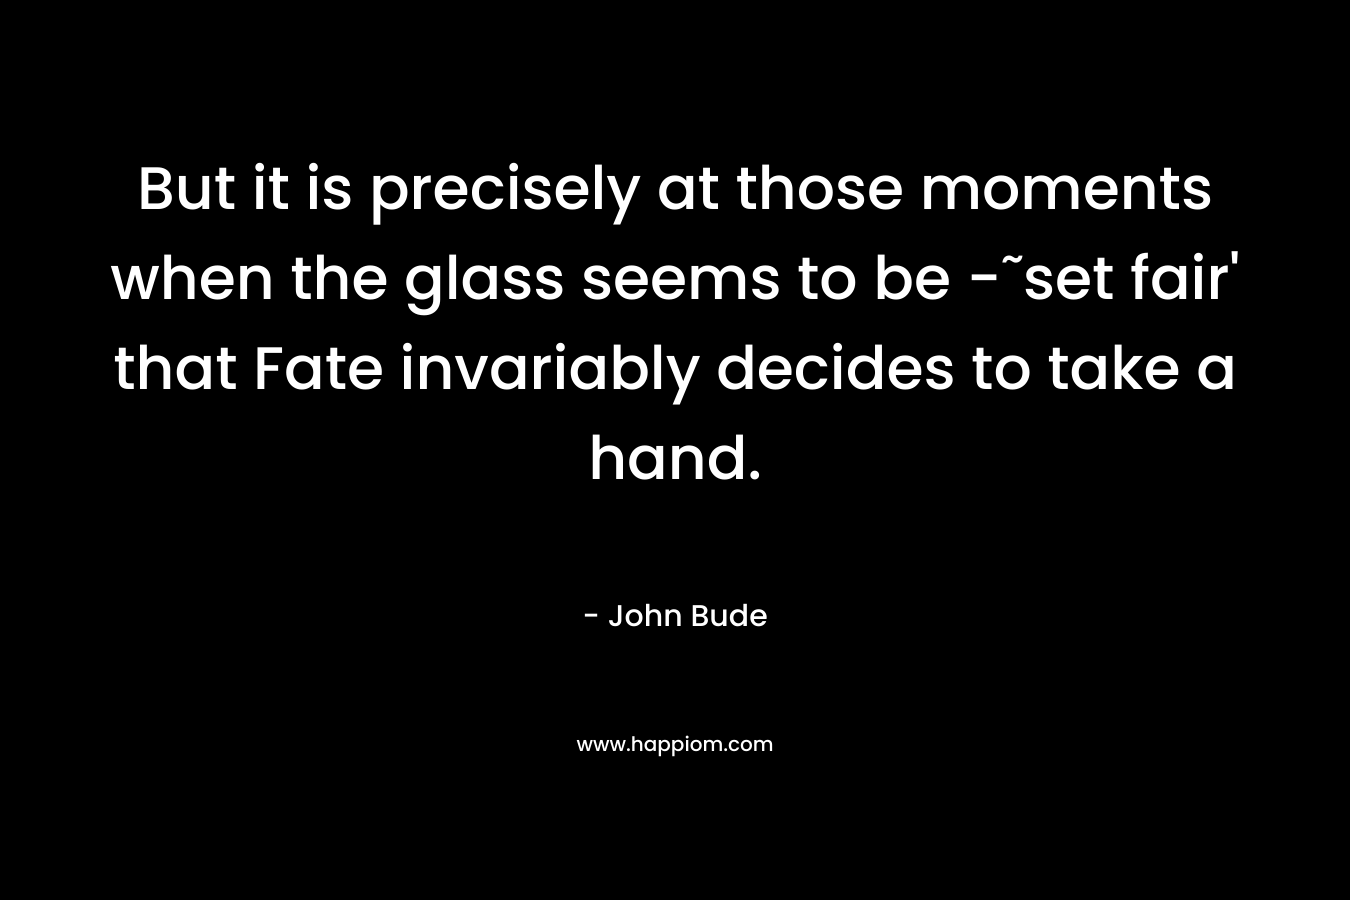 But it is precisely at those moments when the glass seems to be -˜set fair' that Fate invariably decides to take a hand.